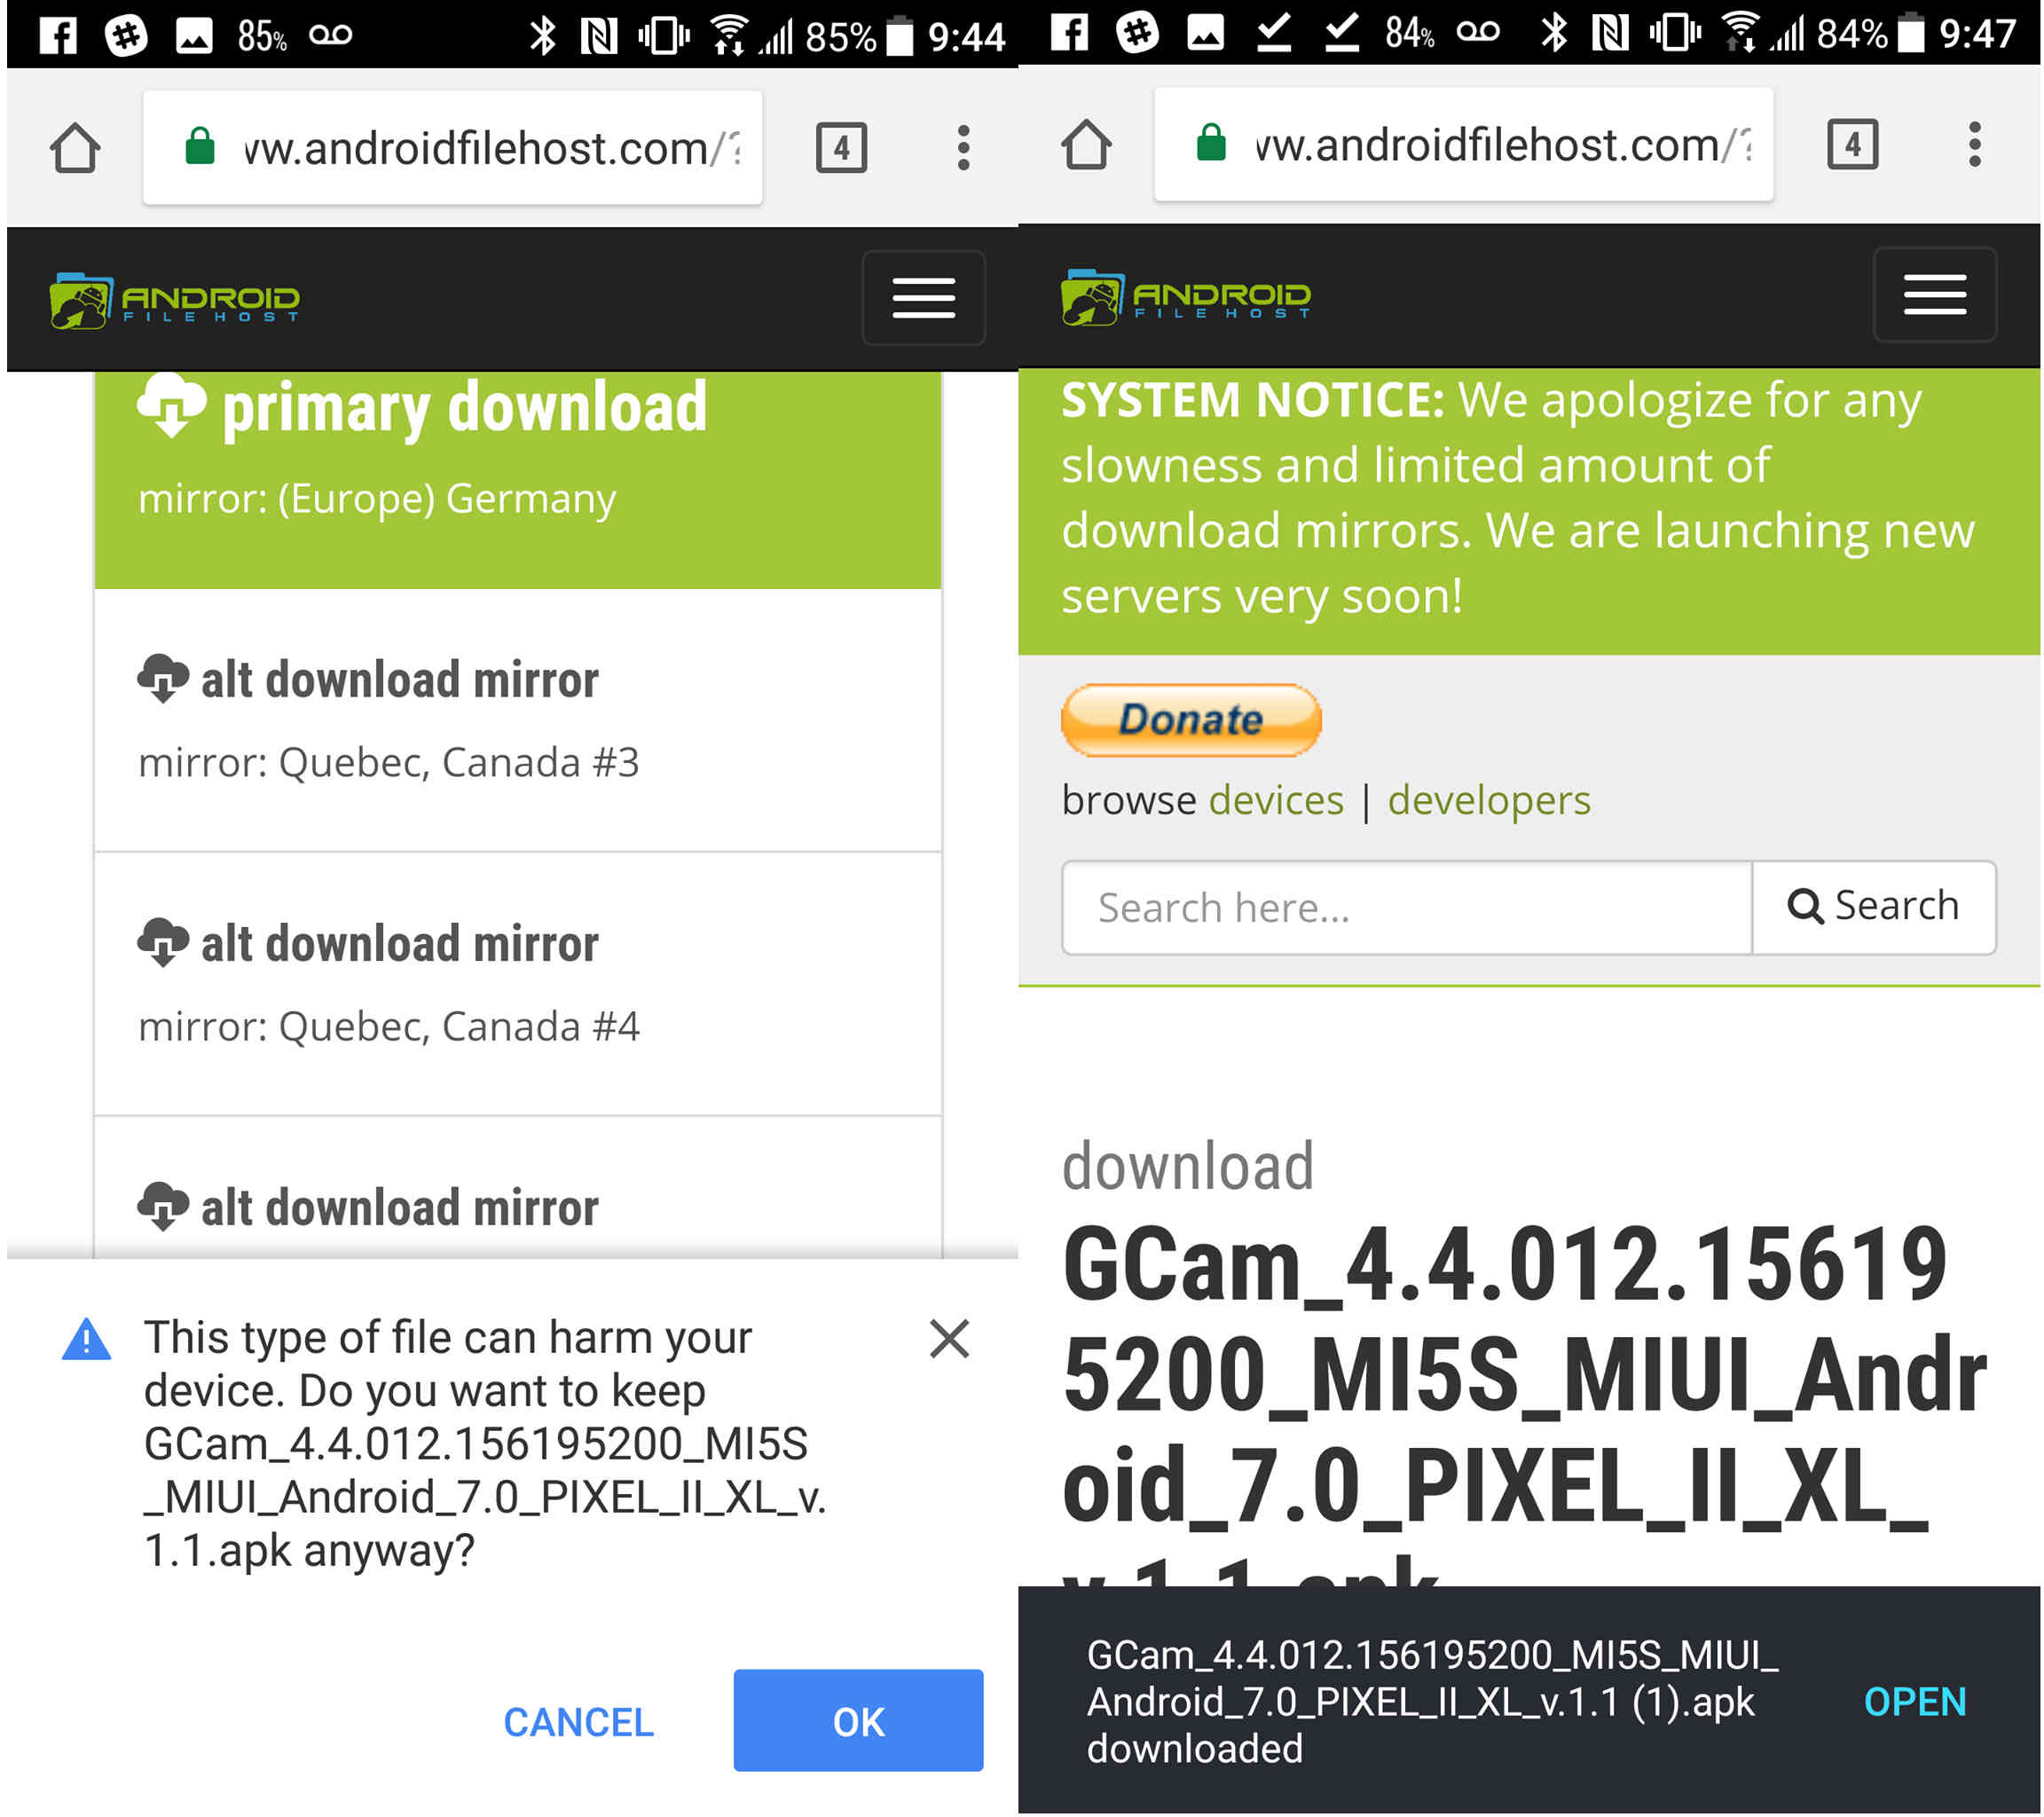 An image showing an Android phone asking permission to install a third-party application